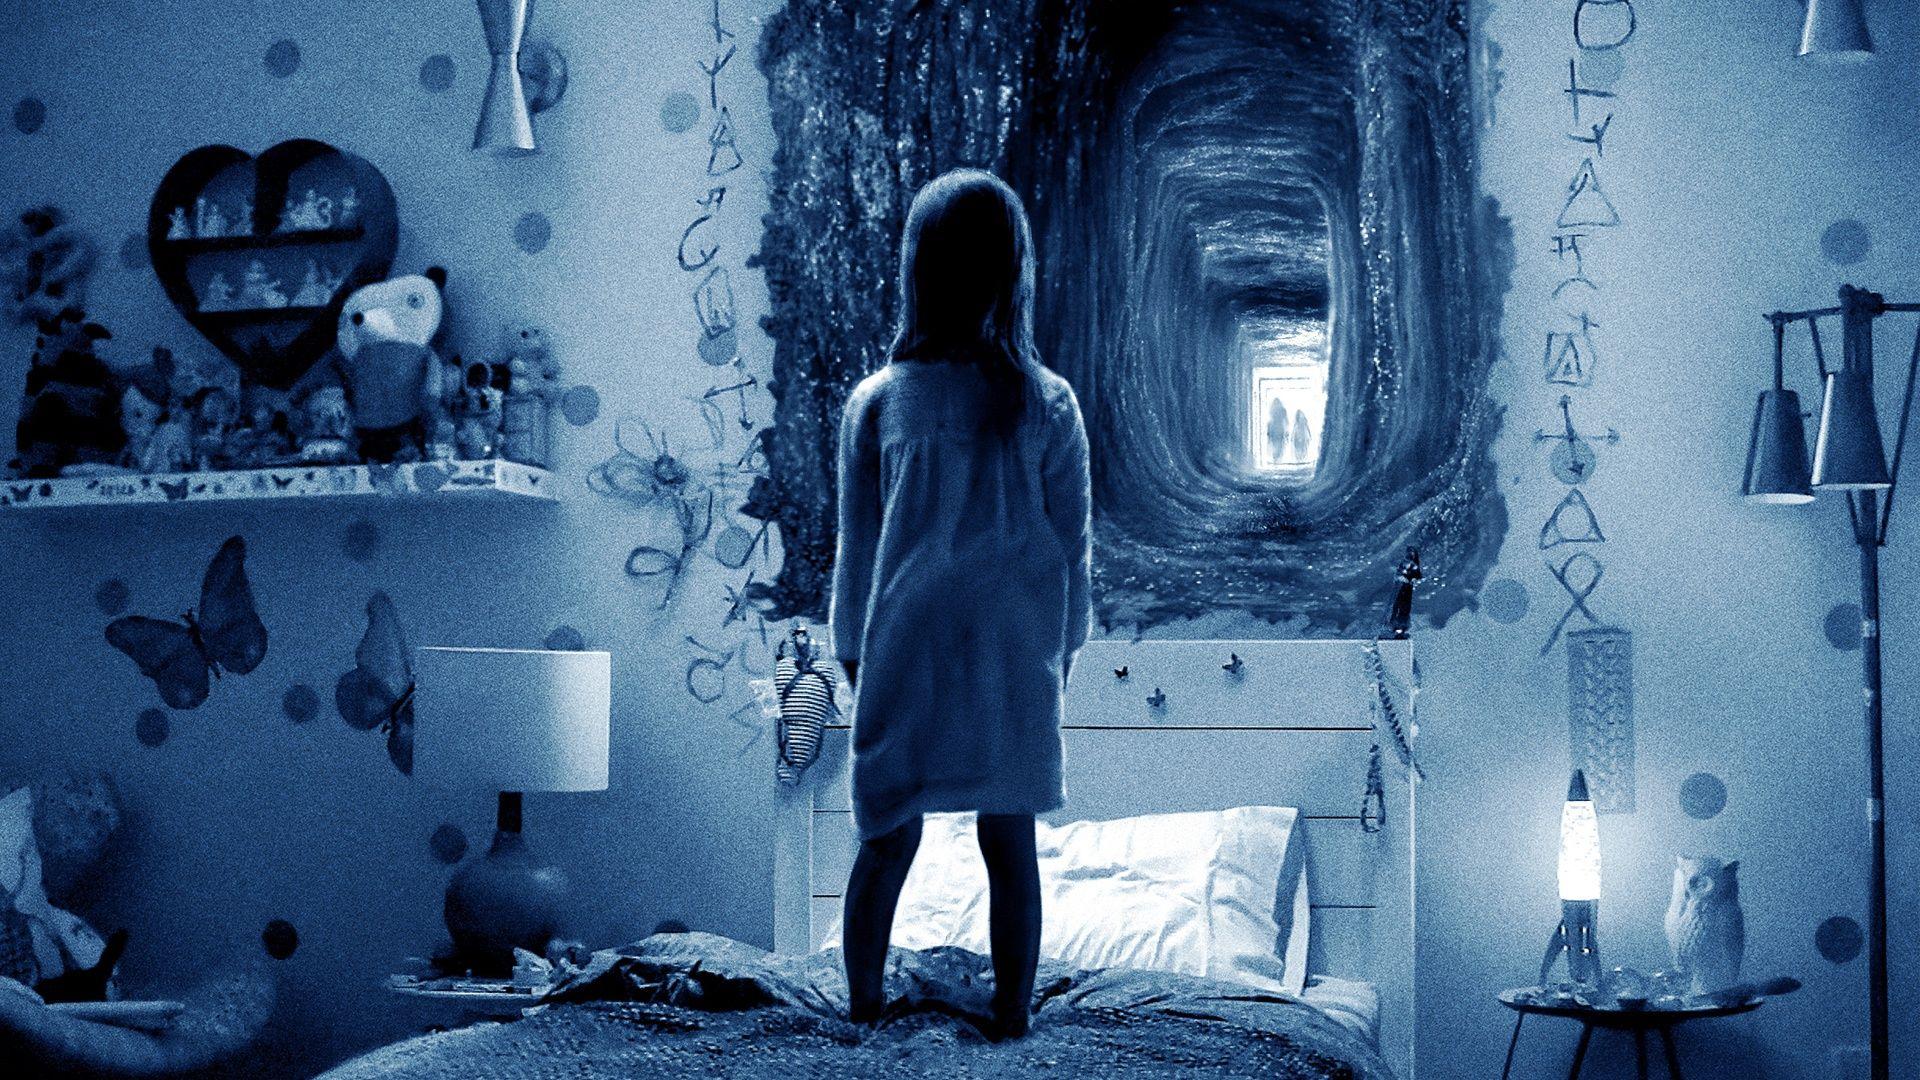 Paranormal Activity The Ghost Dimension Wallpaper in jpg format